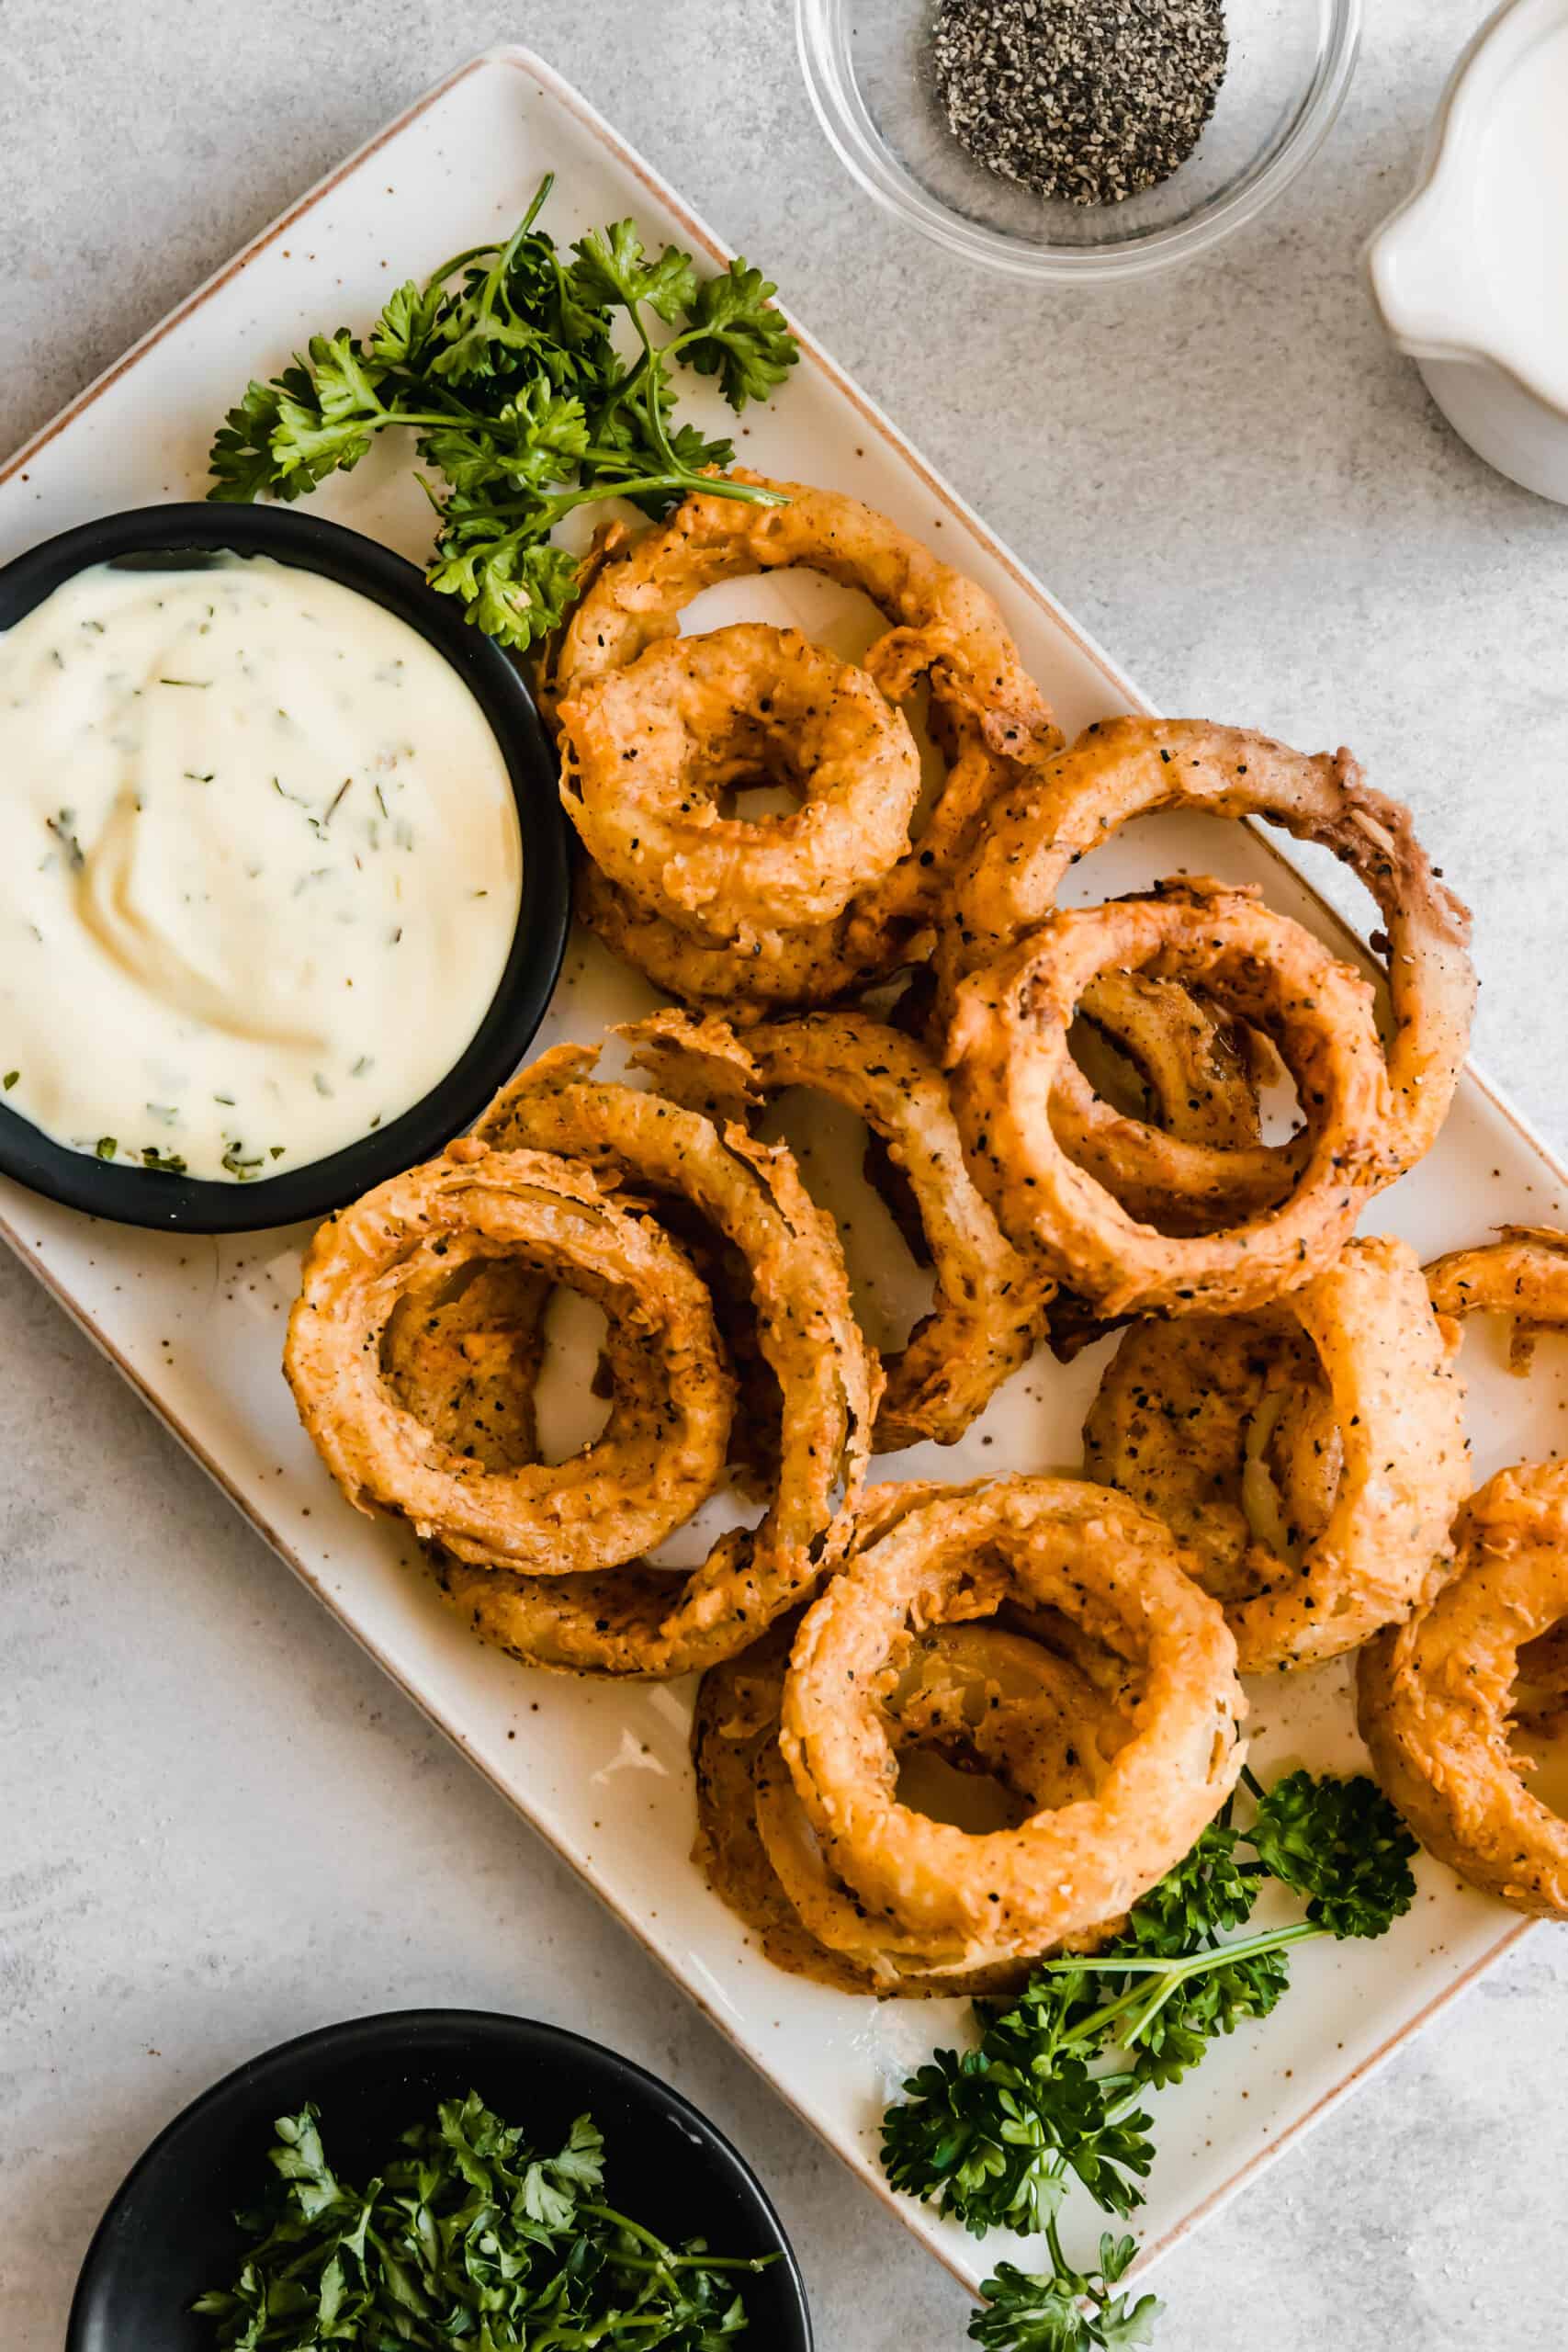 Plate of homemade onion rings with dip.